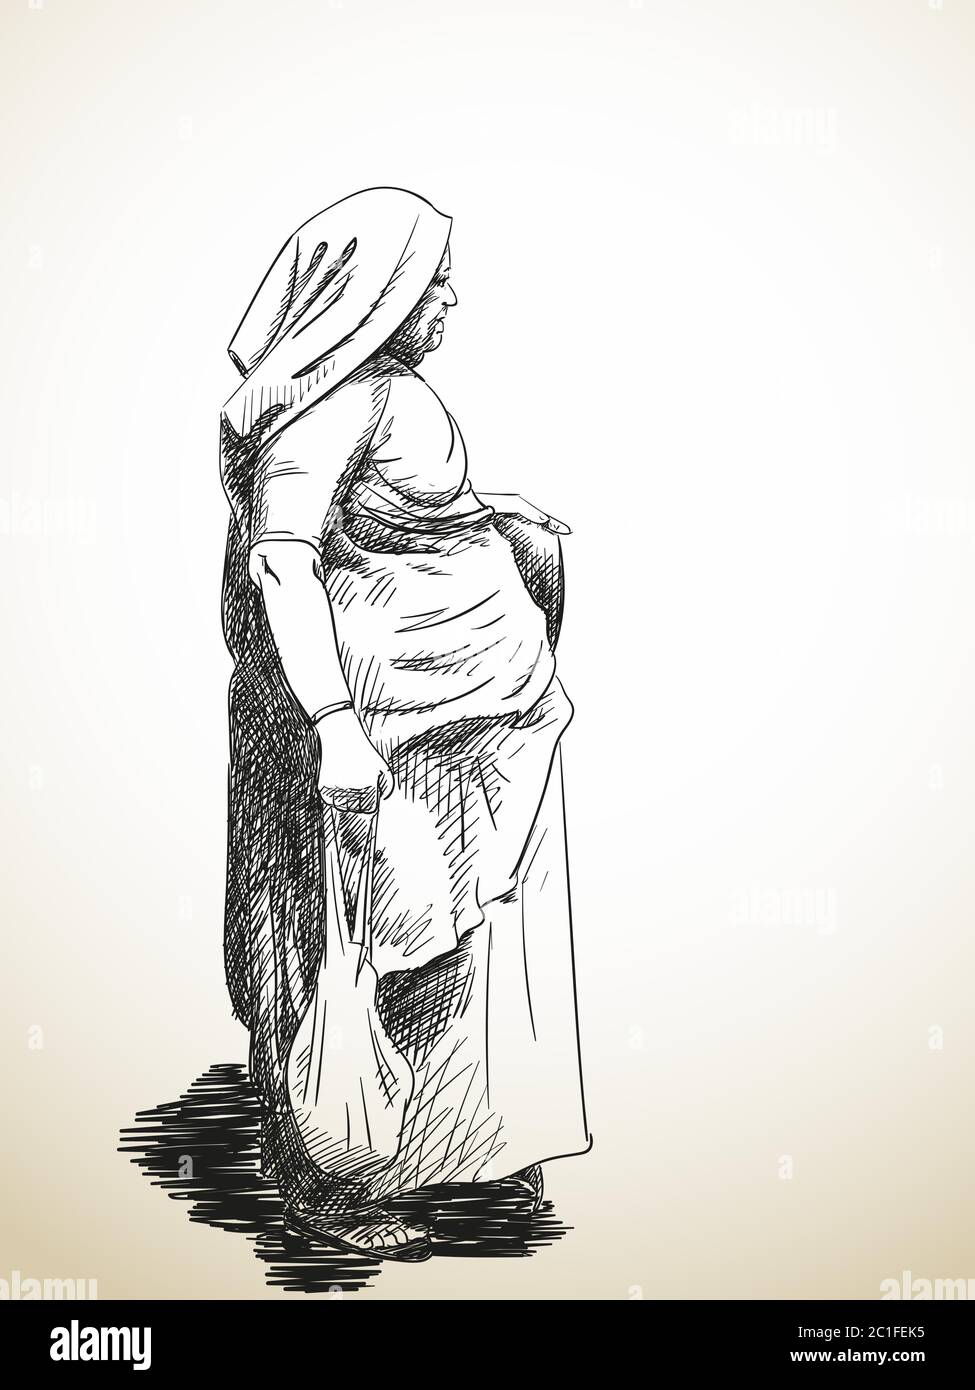 How to Draw a Girl with Sari From Back ll Traditional Drawing ll Girl  Drawing | Pencil drawing images, Pencil sketch images, Pencil drawings easy